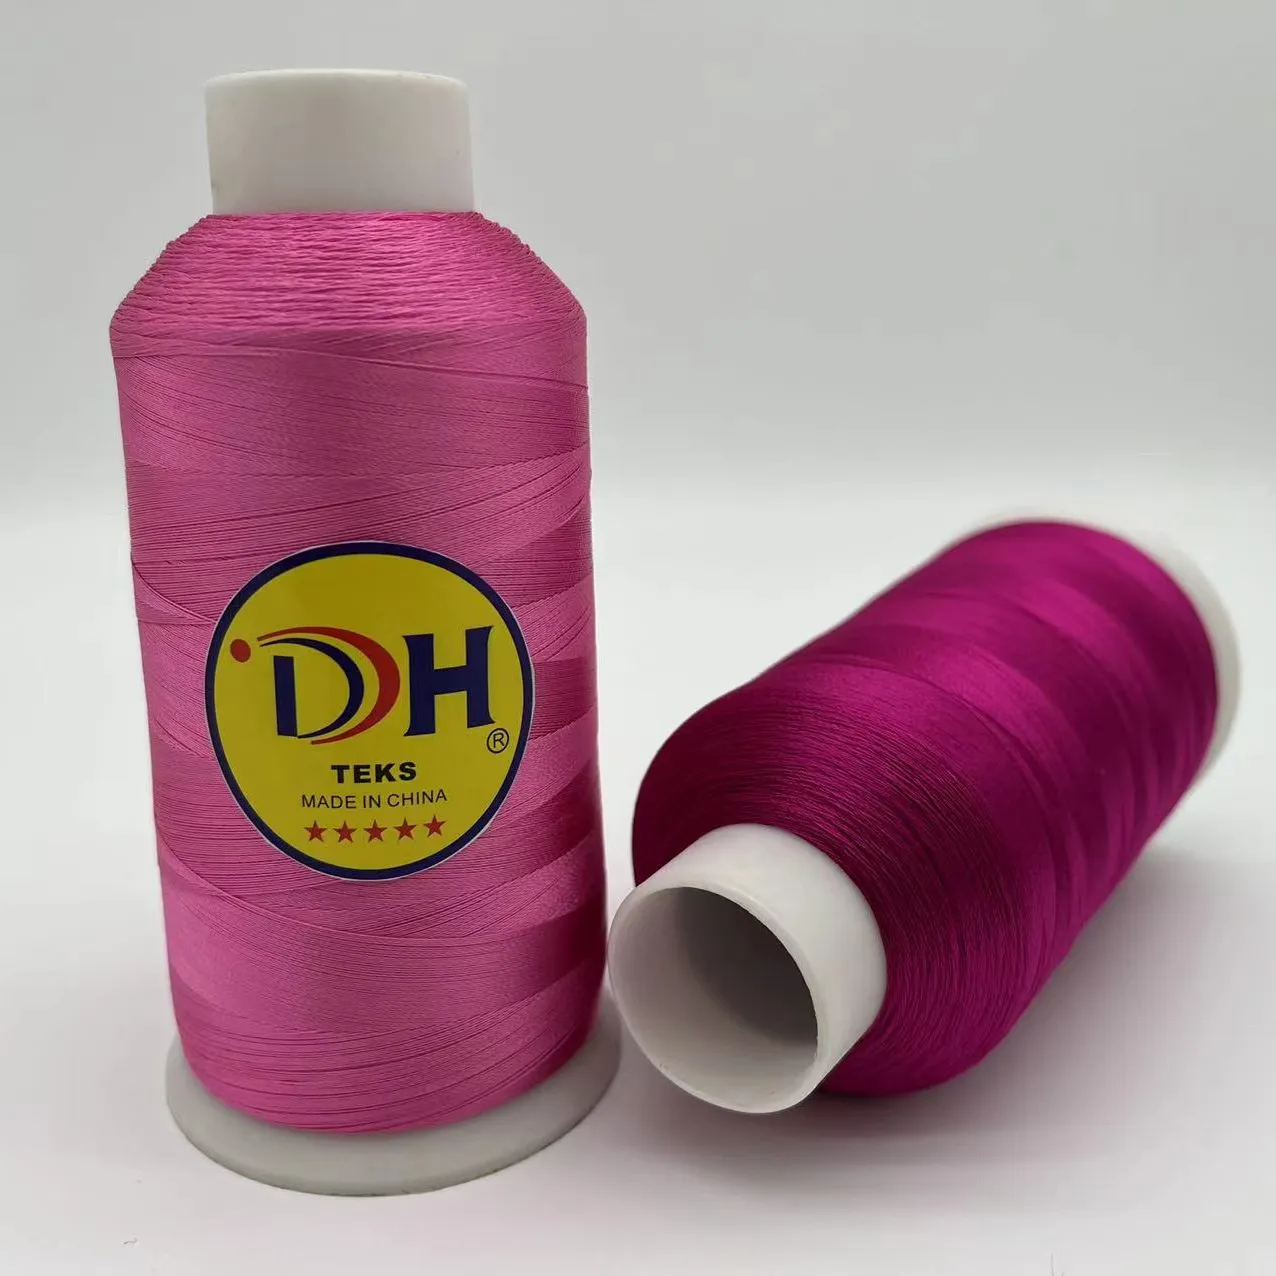 Ningbo China Wholesale Manufacturer Factory DH 120D/2 100% Viscose Rayon Embroidery Thread